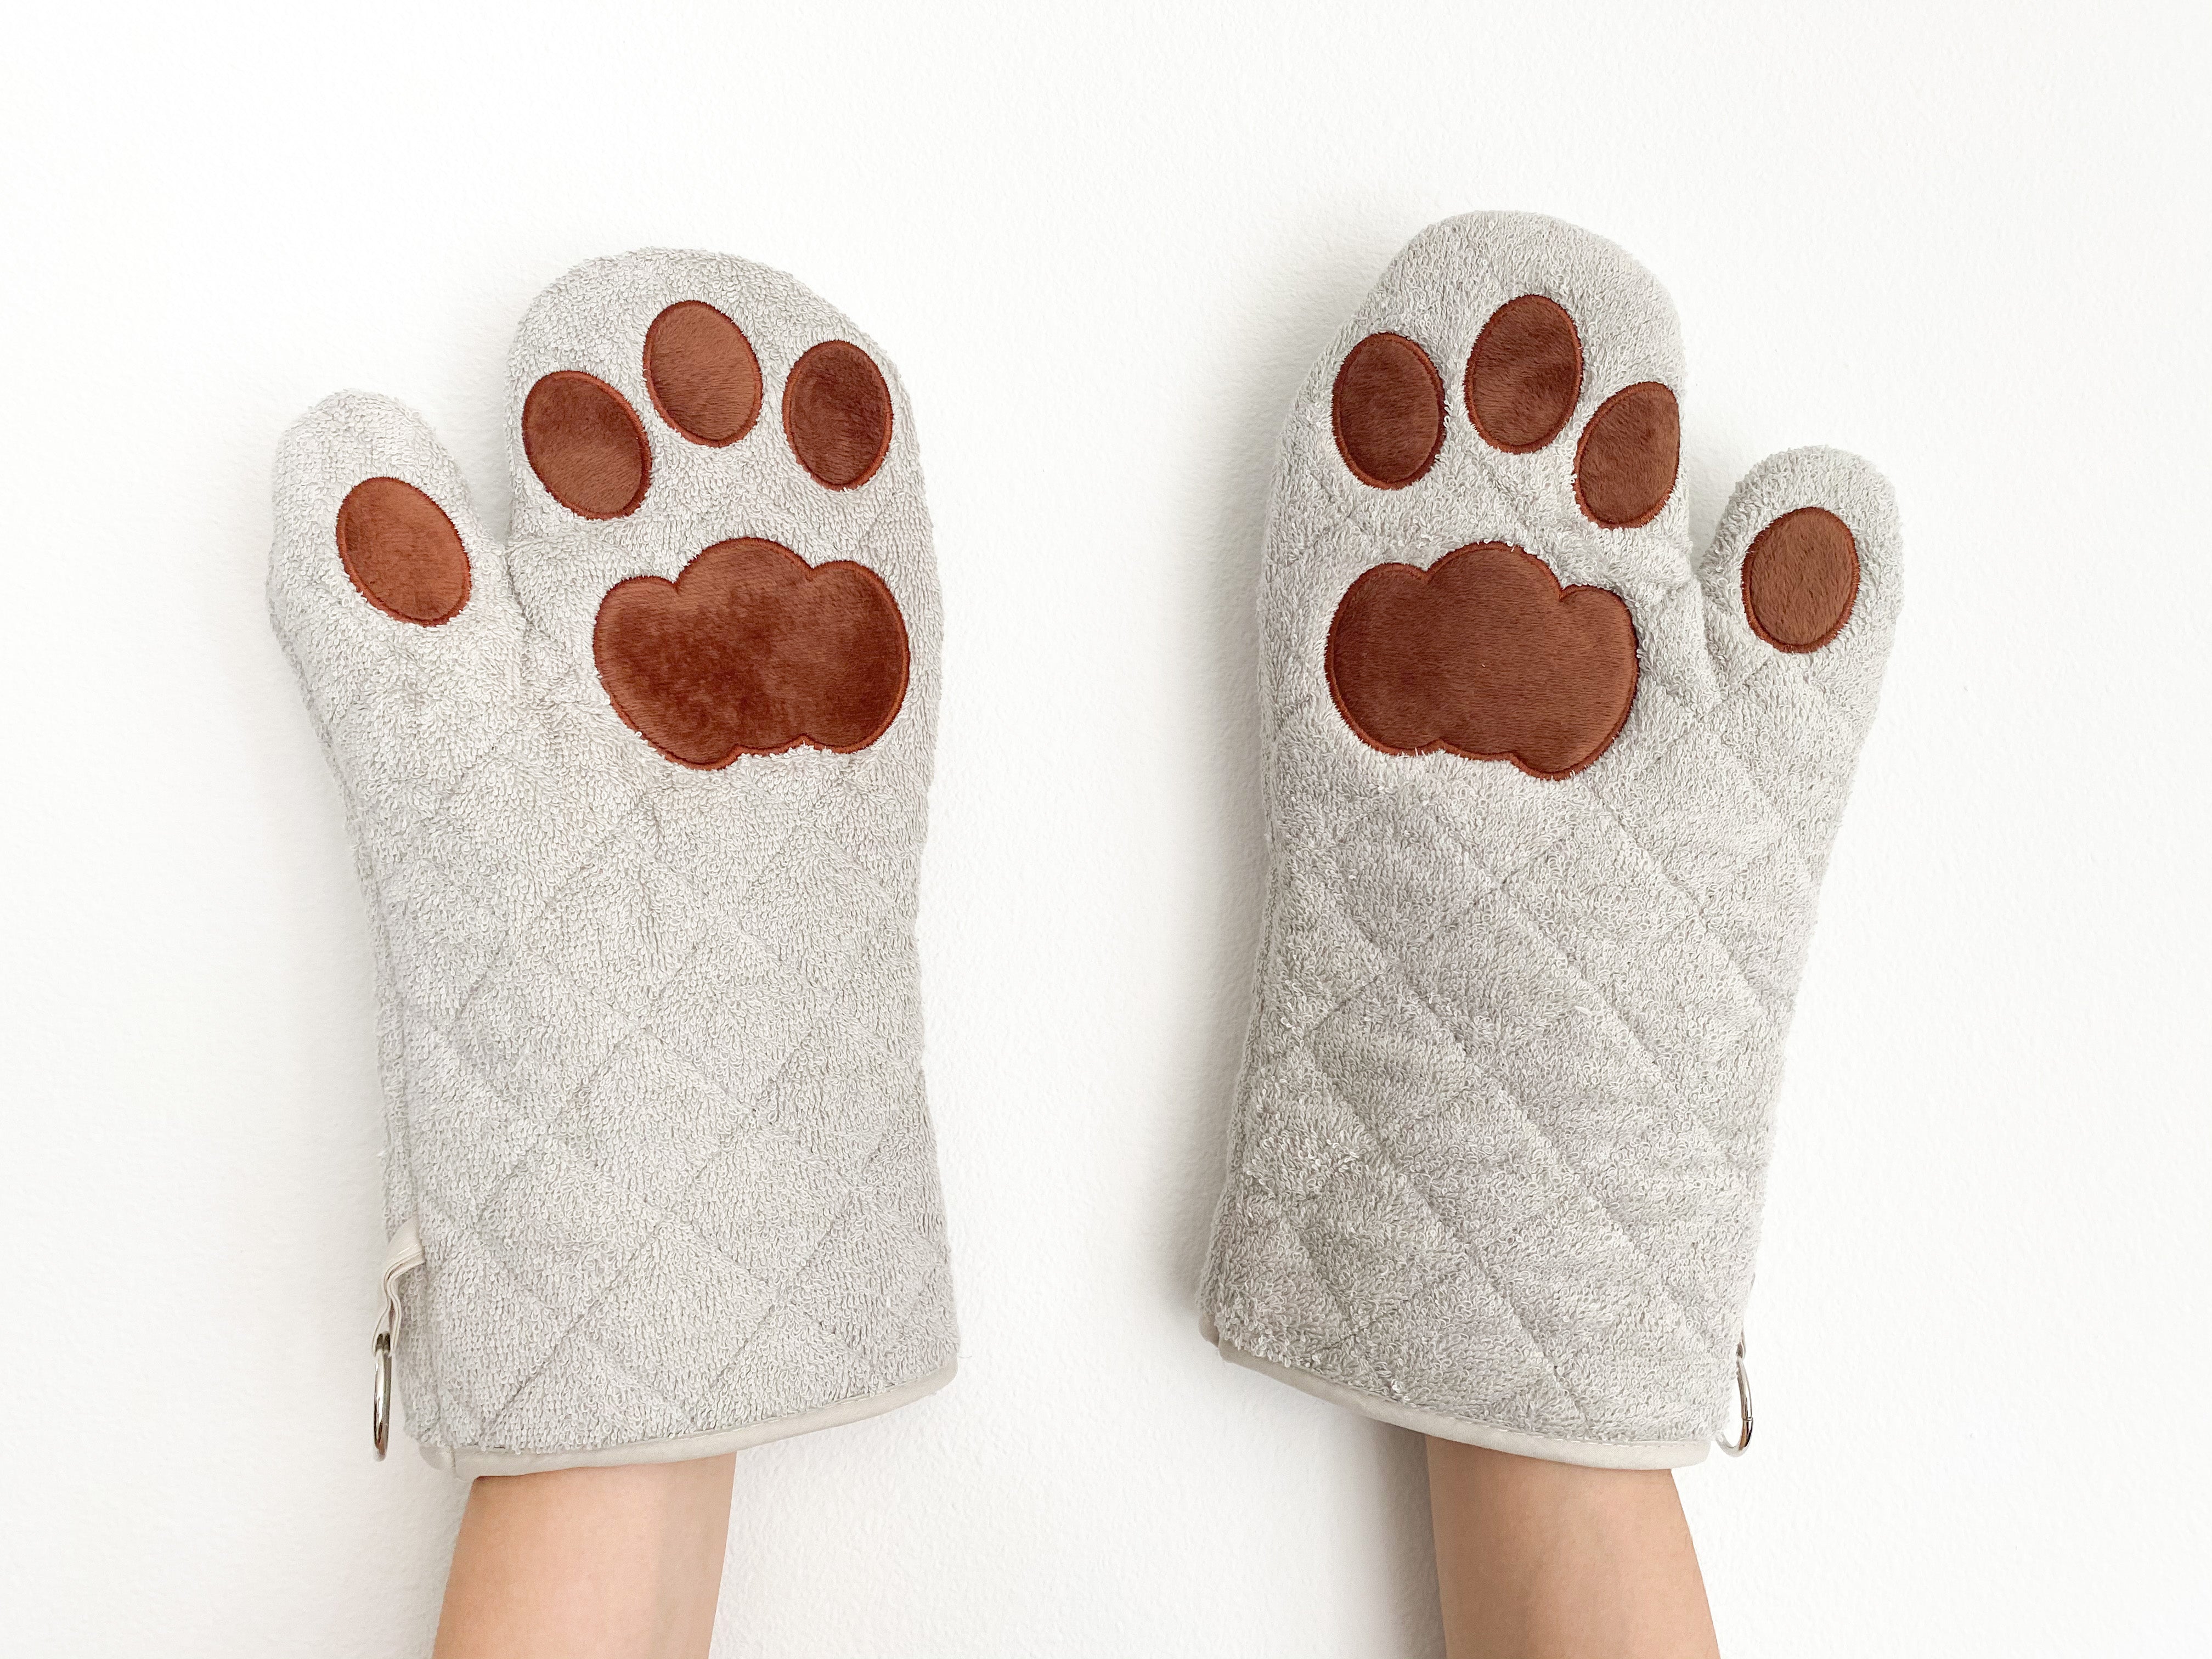 NEW! Gray Tabby Cat Oven Mitt, Made From Scratch